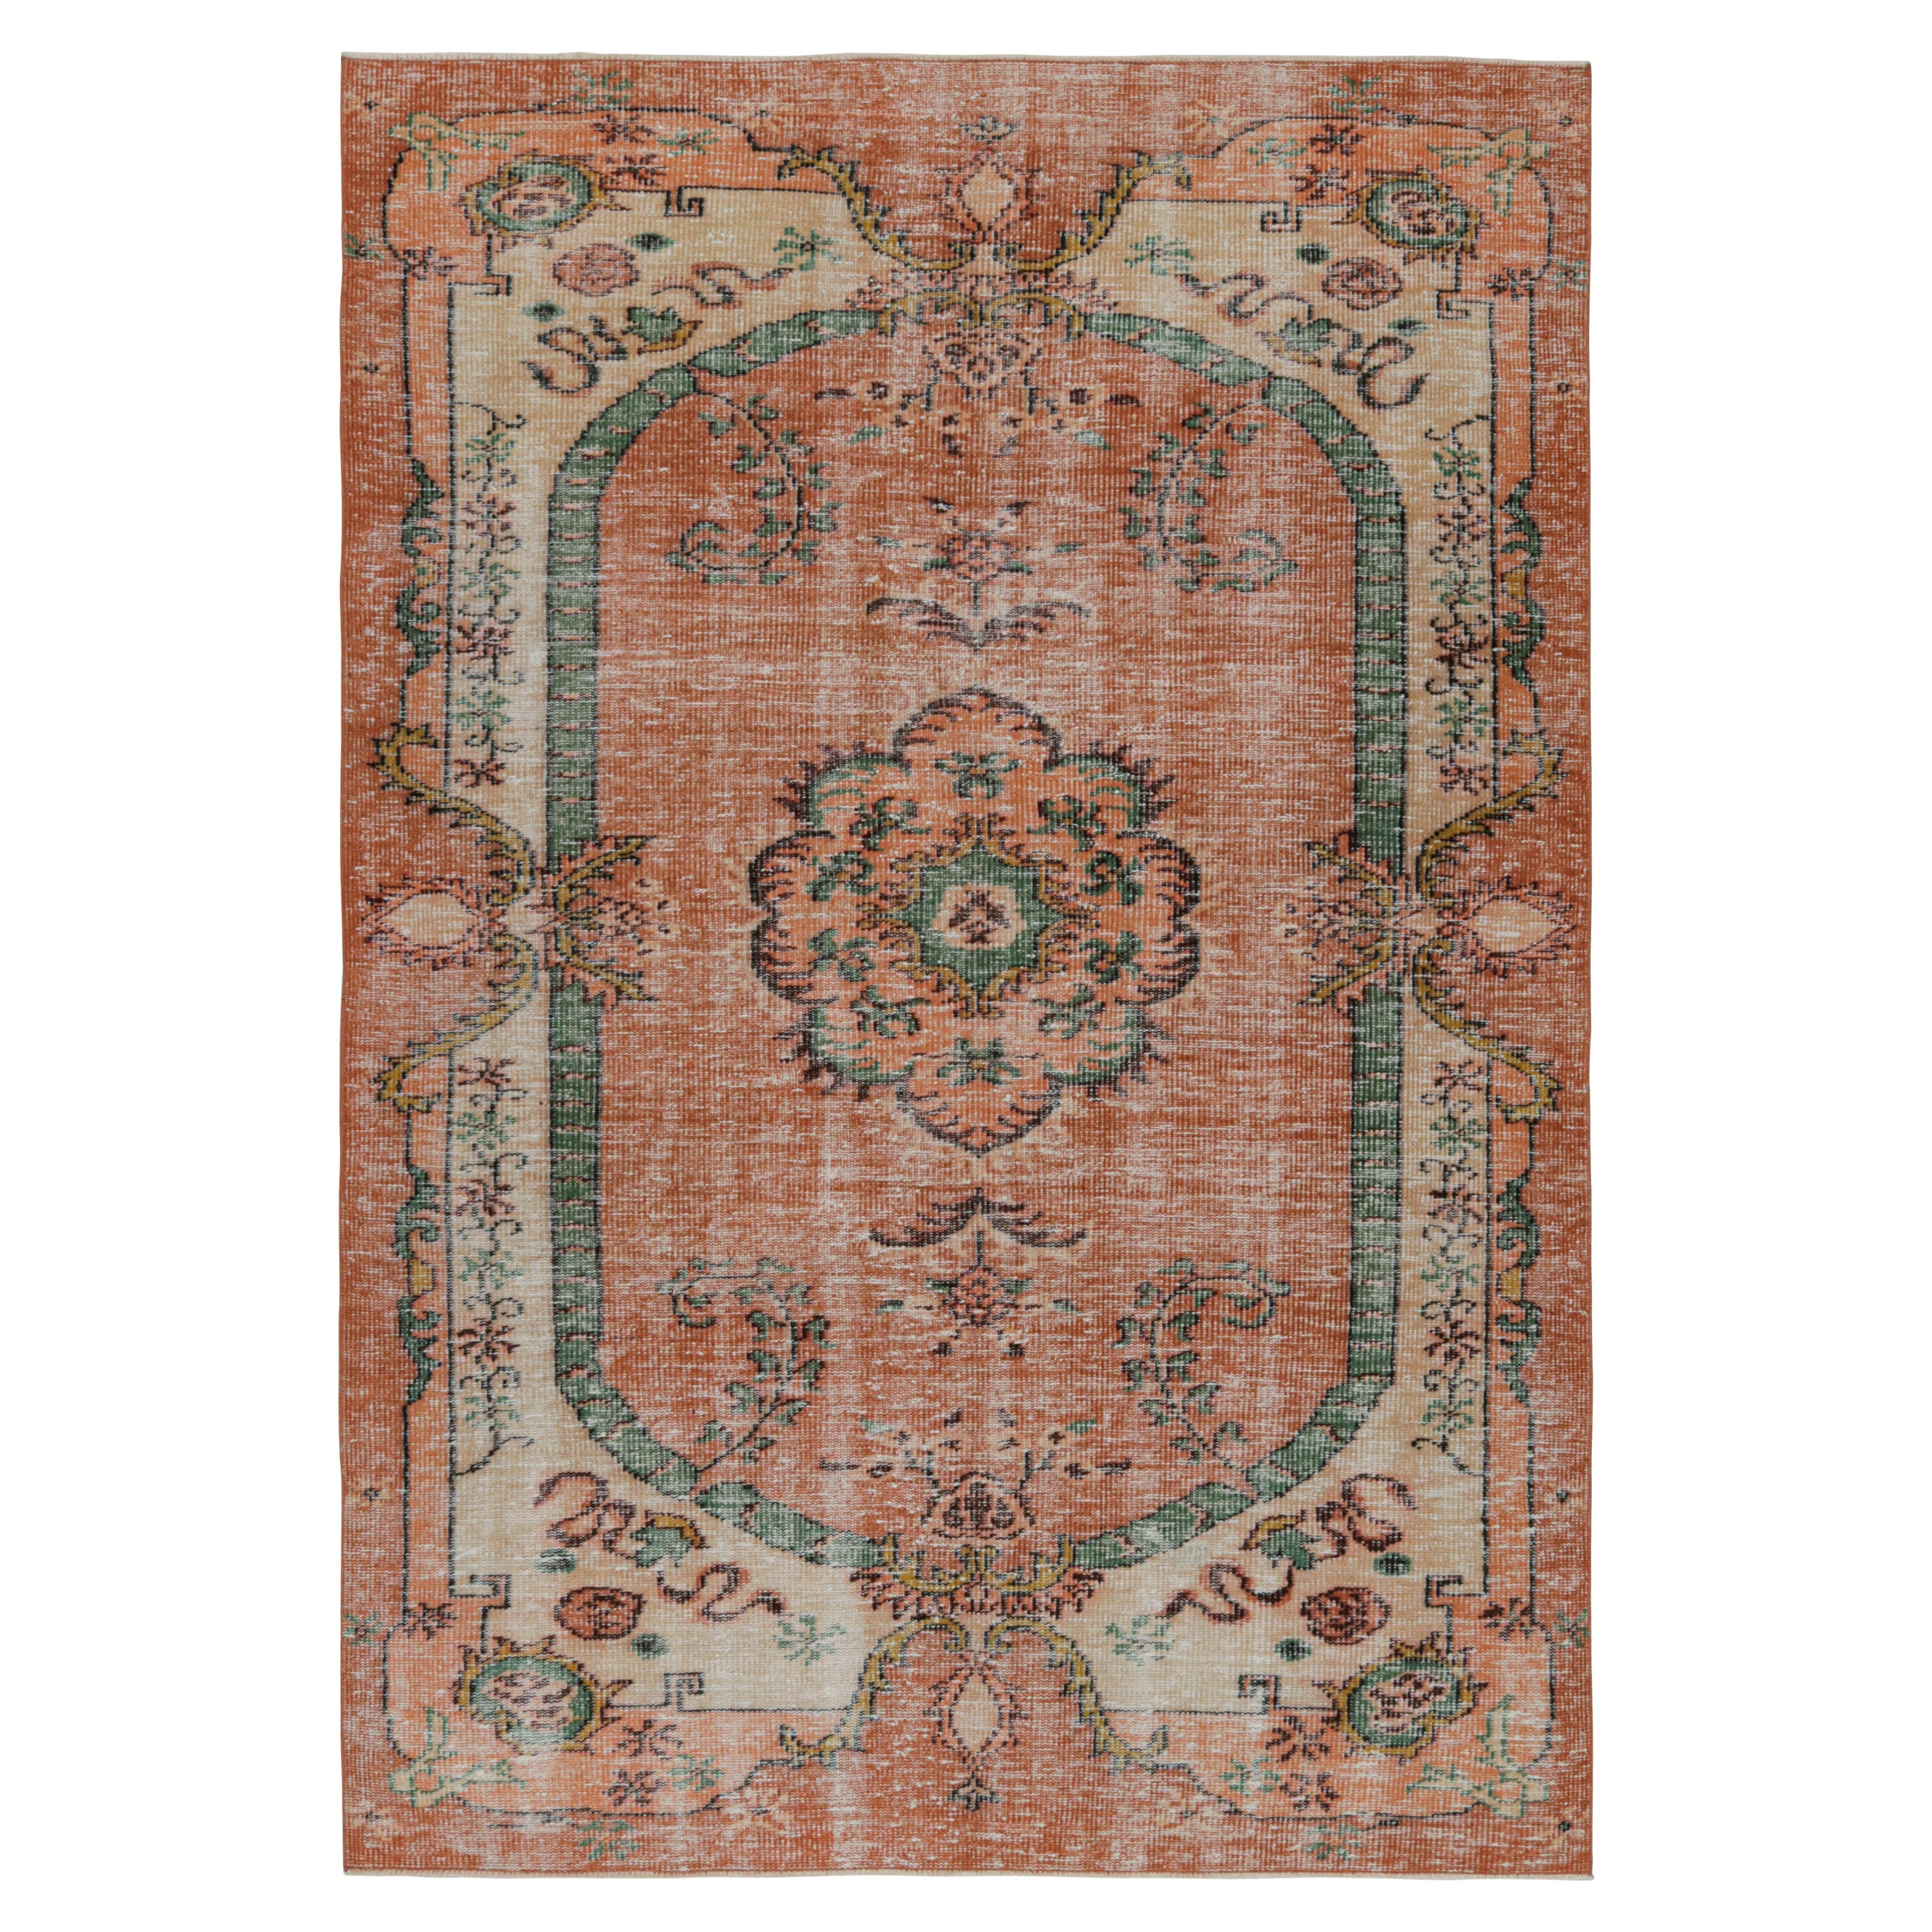 Vintage European Style Rug, with Geometric Floral Patterns, from Rug & Kilim For Sale